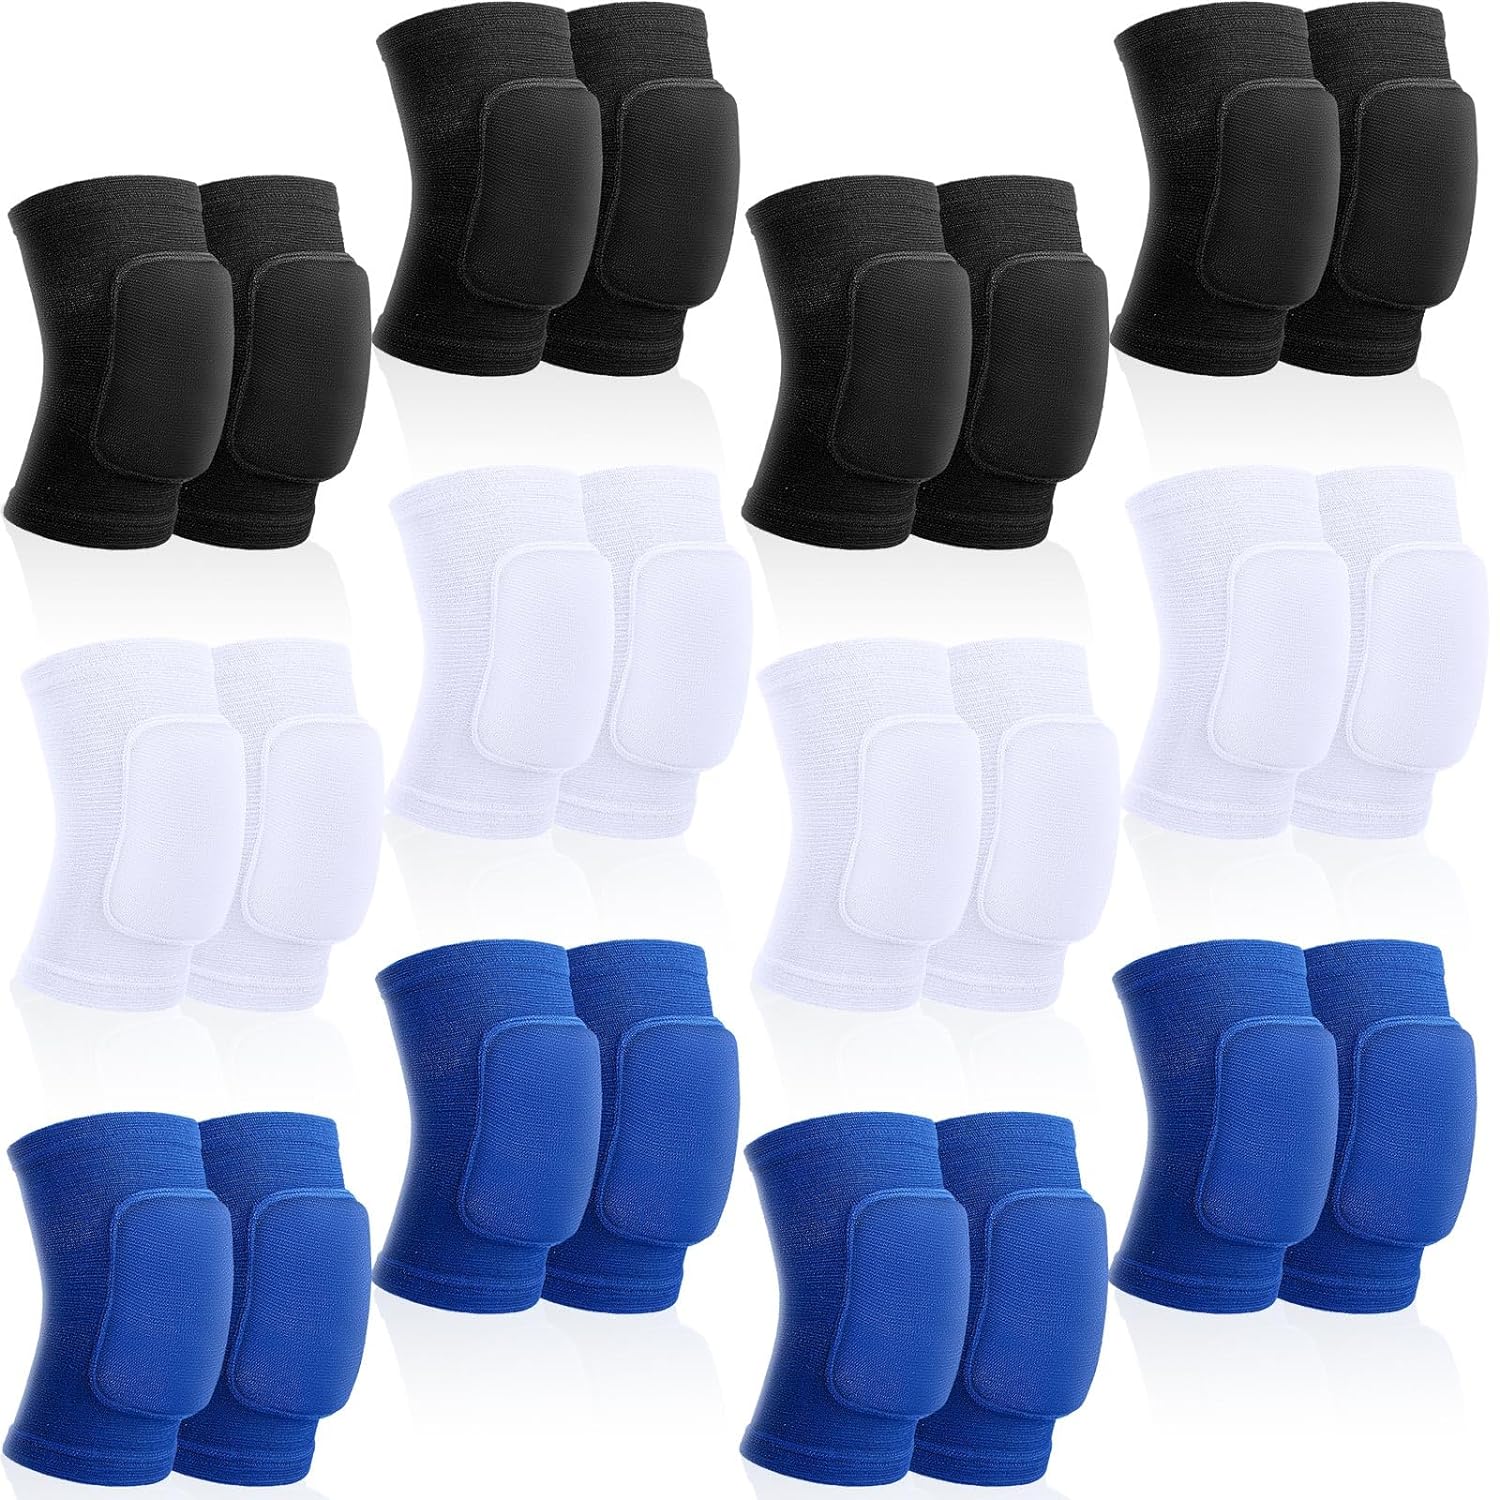 Lenwen 12 Pairs Volleyball Knee Pads for Dancers, Breathable Knee Pads for Men Women Kids, Black Knee Braces for Volleyball Football Soccer Dance Yoga Wrestling Running Cycling (Classic Color,Medium)